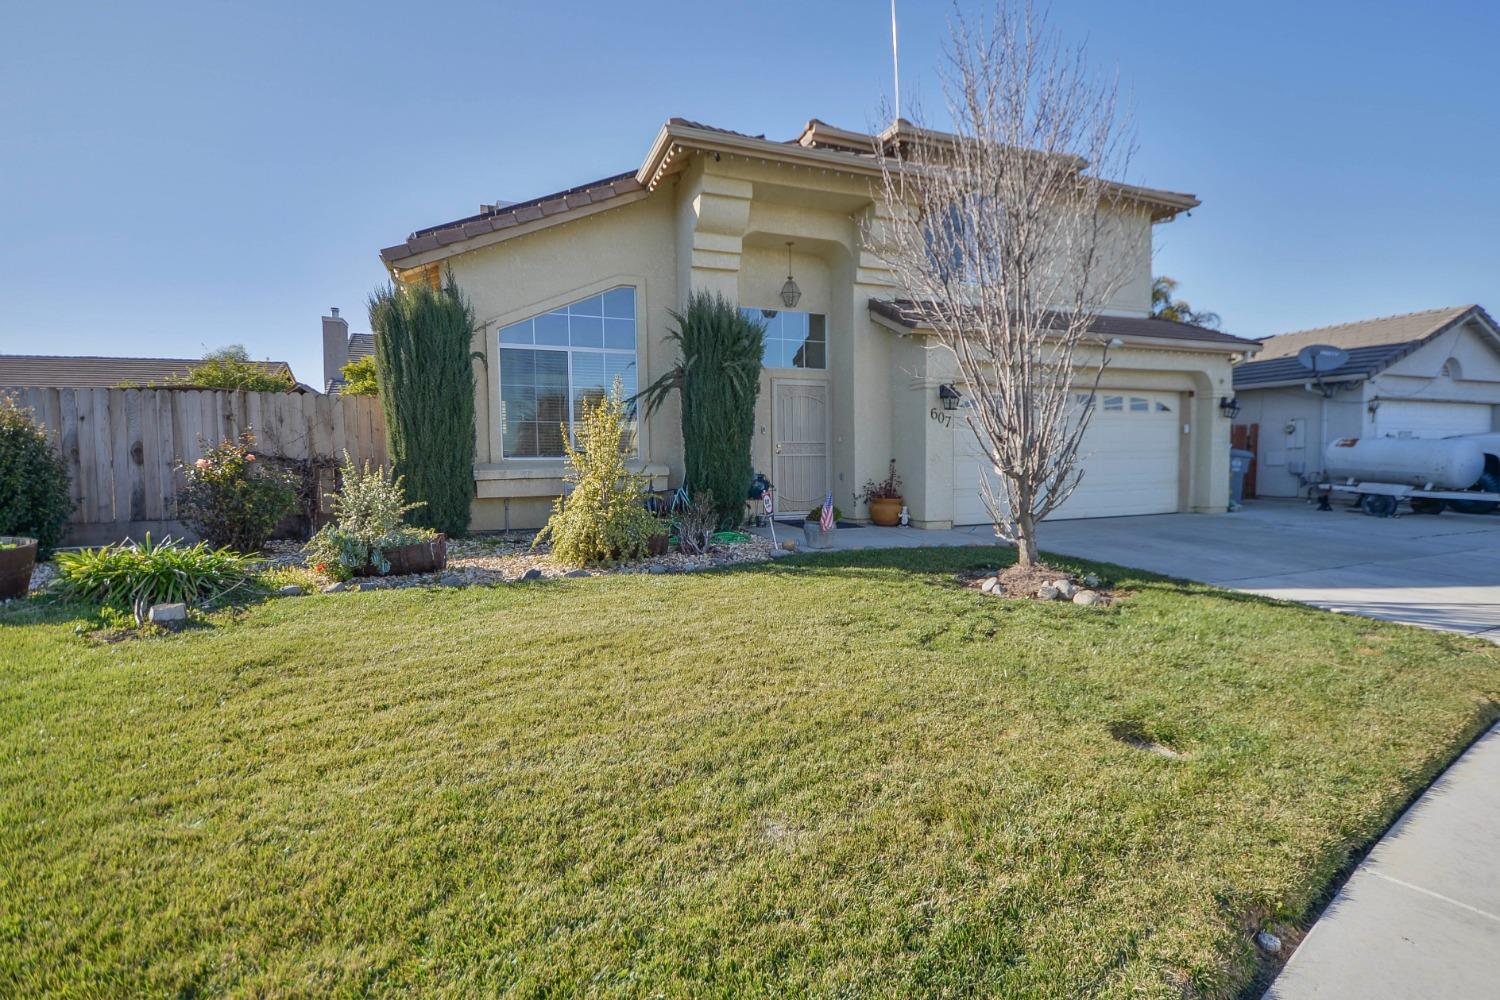 Discover this amazing home at 607 Grape St in Los Banos. This stunning 4 bedroom, 2.5 bathroom home 